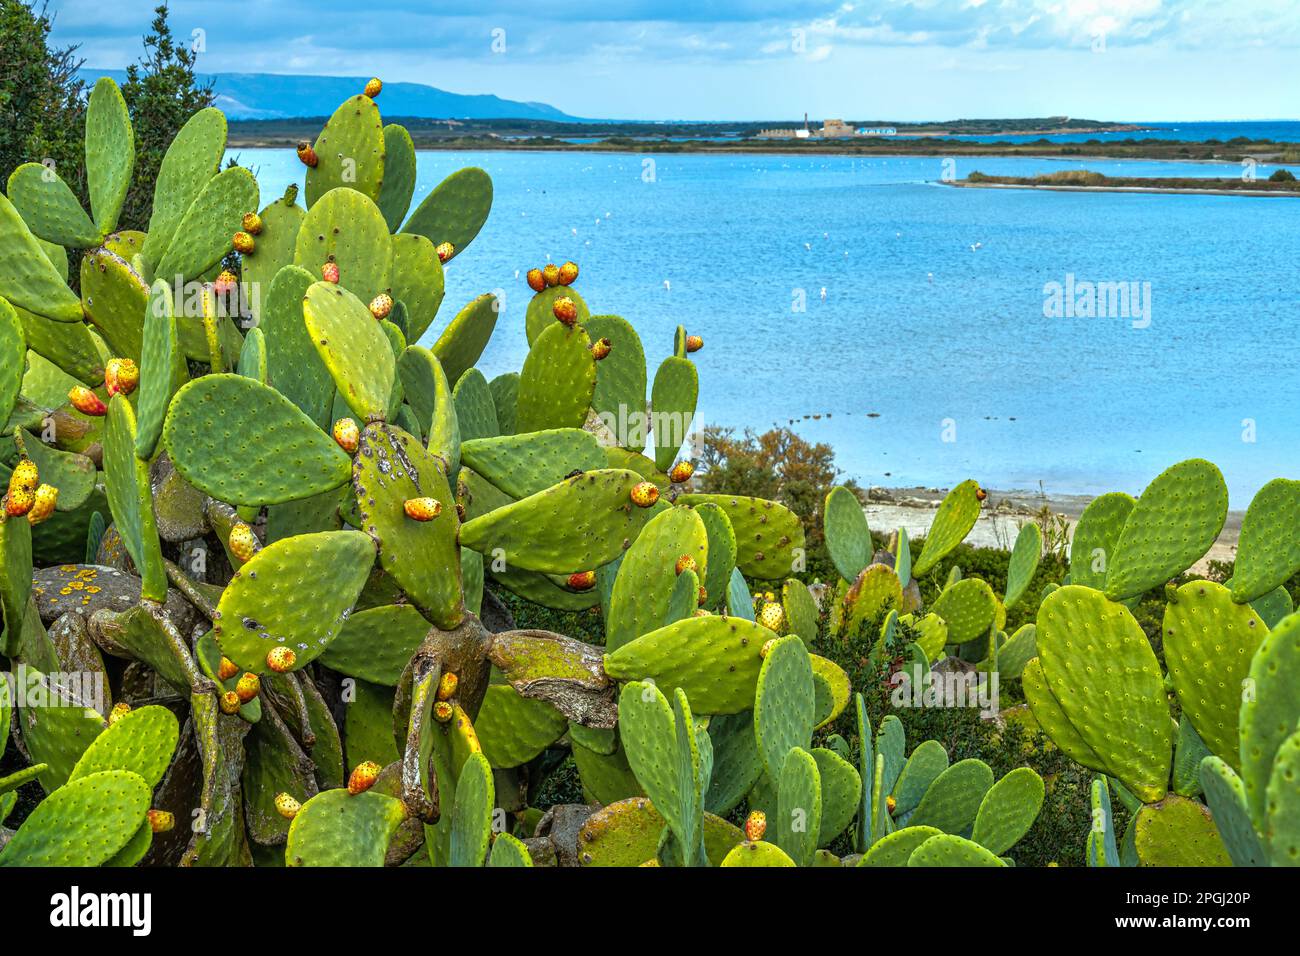 Cactus and prickly pear fruits in front of the coast of Pantano Sichilli in the Vendicari nature reserve. Noto, Province of Syracuse, Sicily, Italy Stock Photo